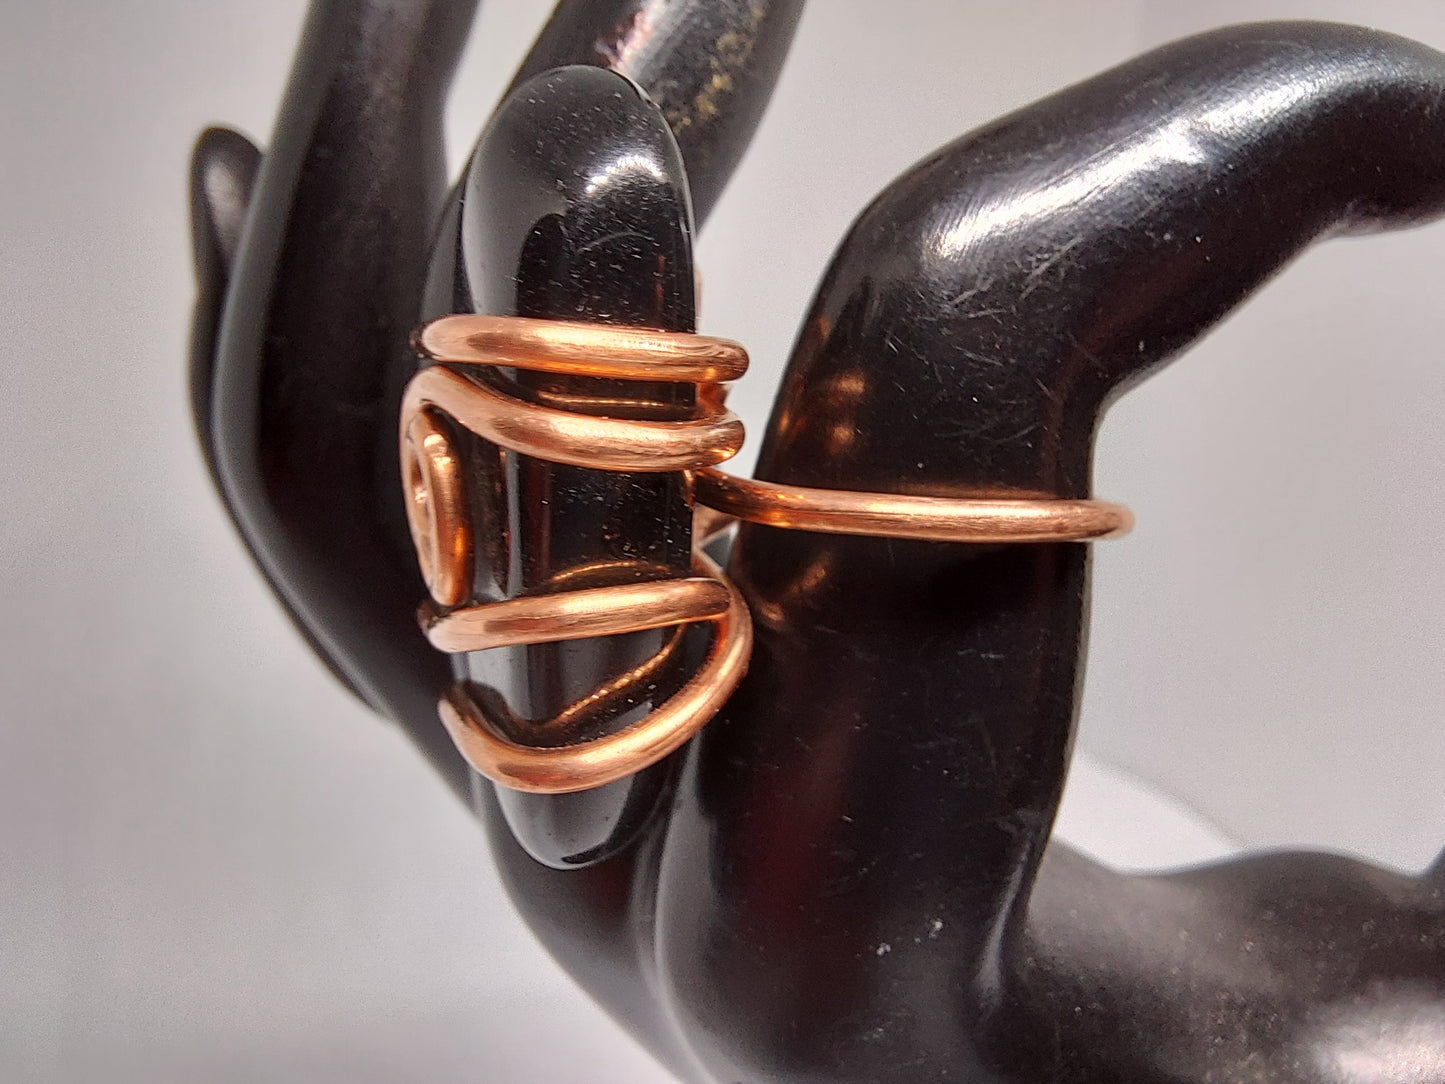 Onyx Copper Wire Ring